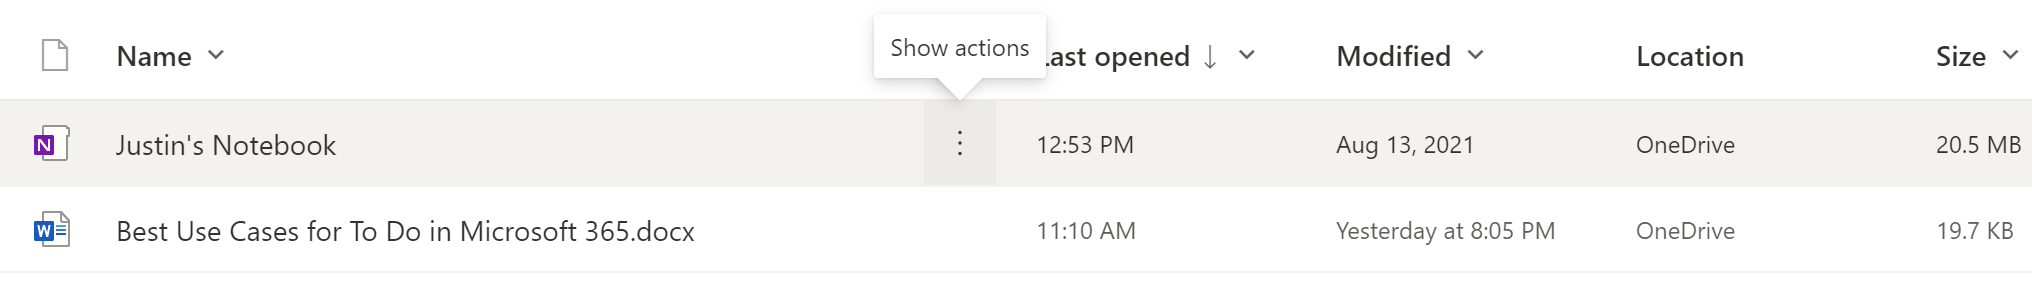 A screenshot shows the Show actions notification in Microsoft 365 OneDrive.